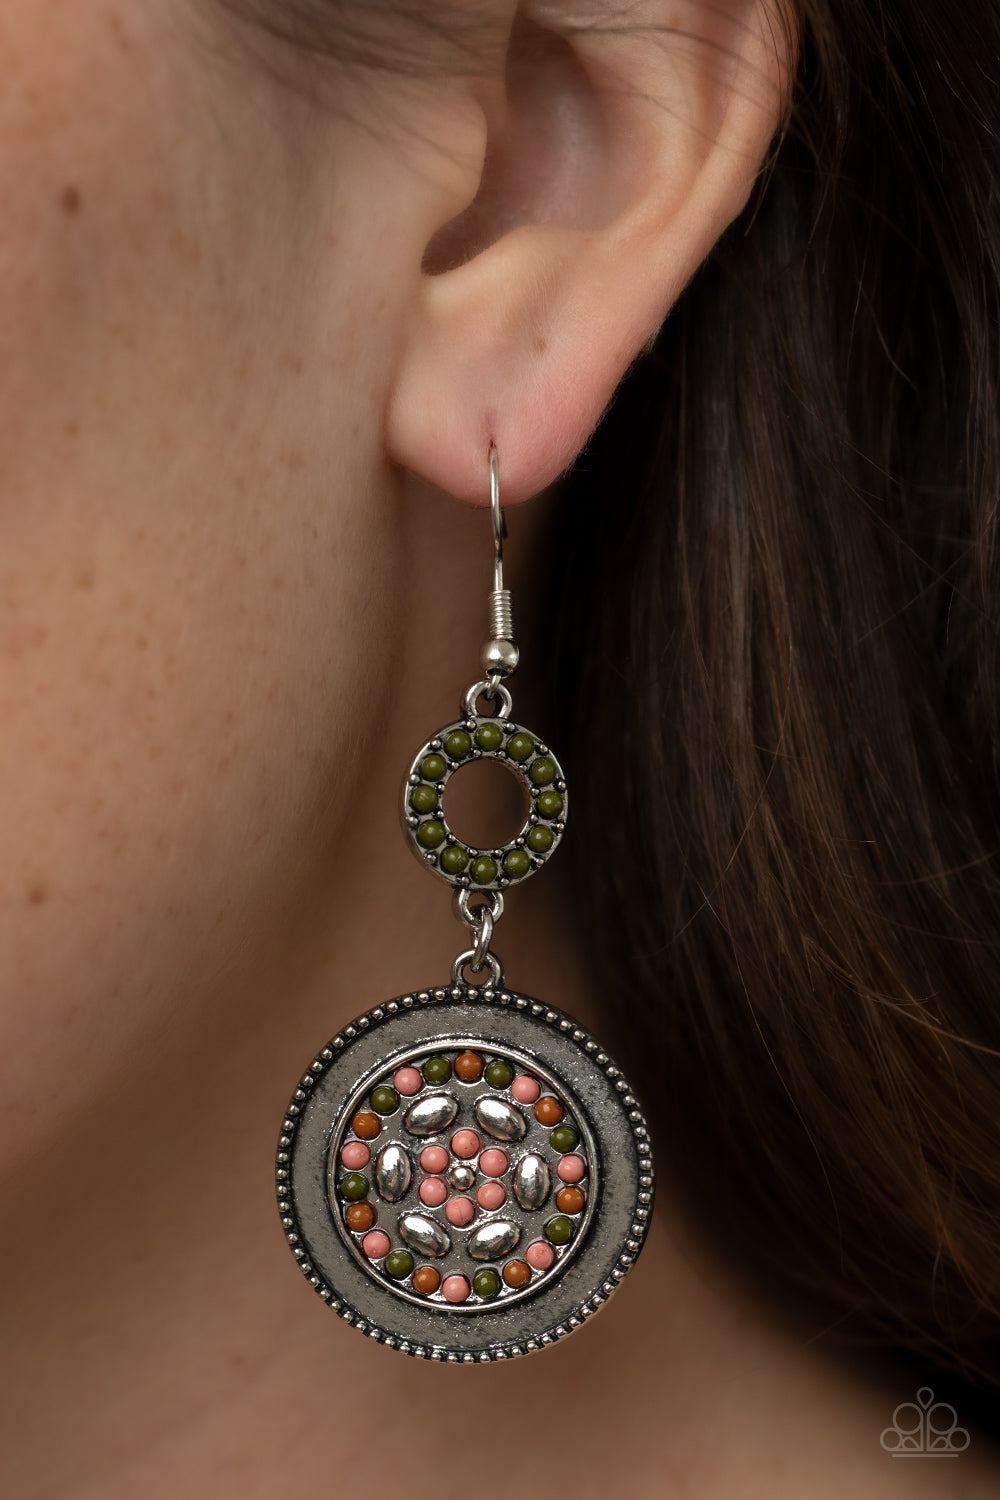 Meadow Mantra - Multicolored Silver Earrings- Paparazzi Accessories